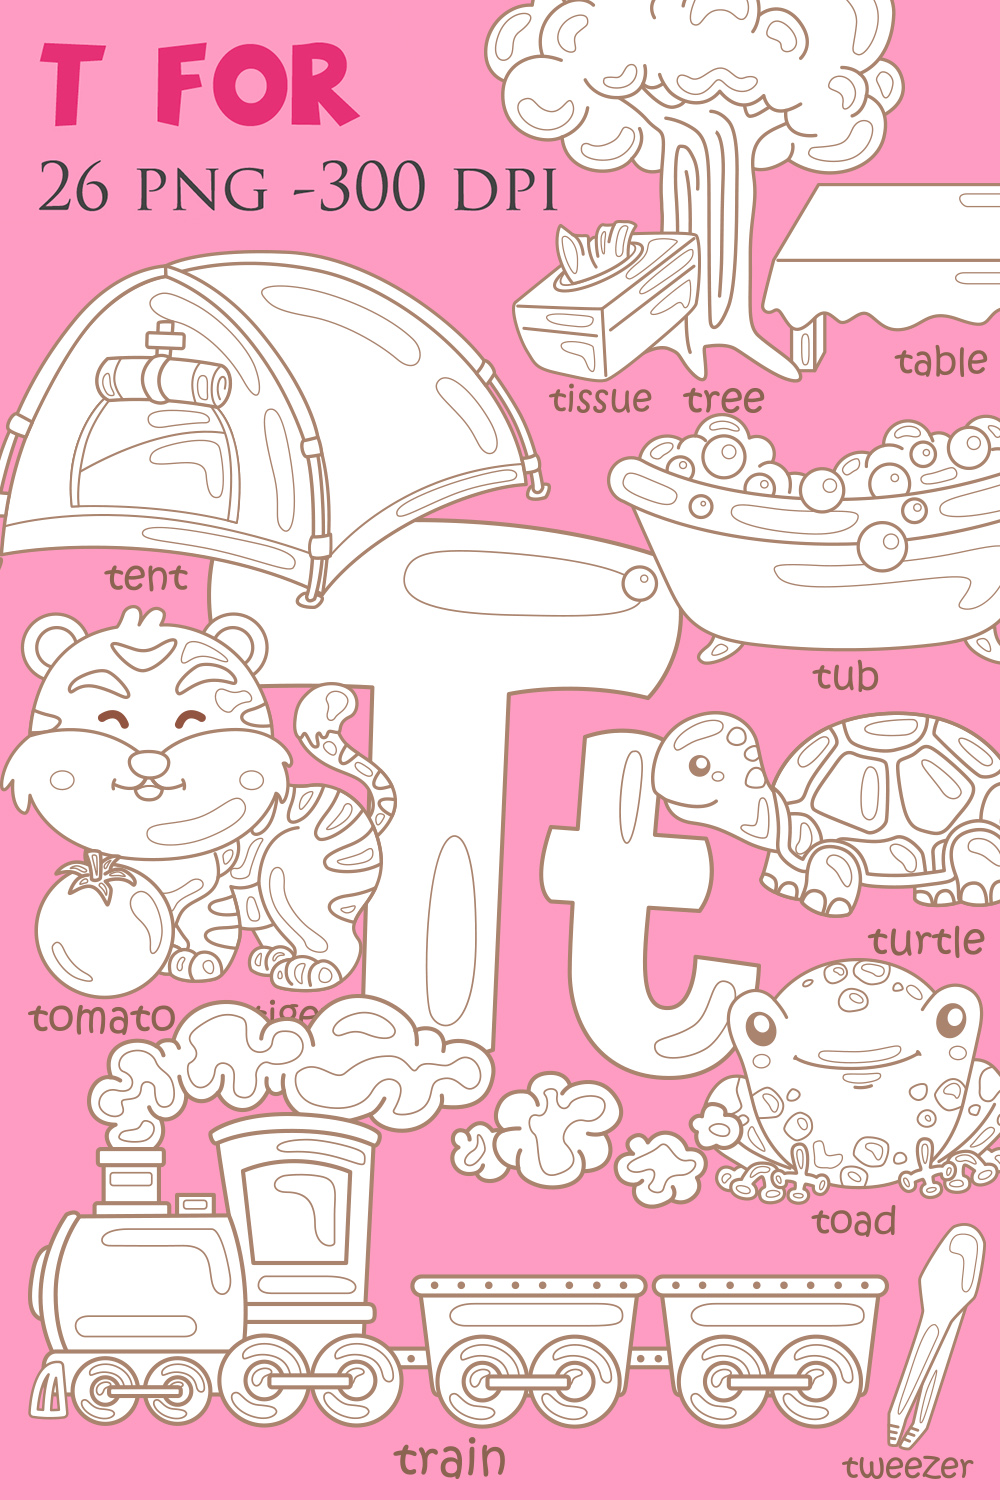 Alphabet T For Vocabulary School Letter Reading Writing Font Study Learning Student Toodler Kids Cartoon Lesson Tomato Tent Tub Tissue Turtle Train Tree Teapot Tiger Tweezer Table Toad Cartoon Digital Stamp Outline pinterest preview image.